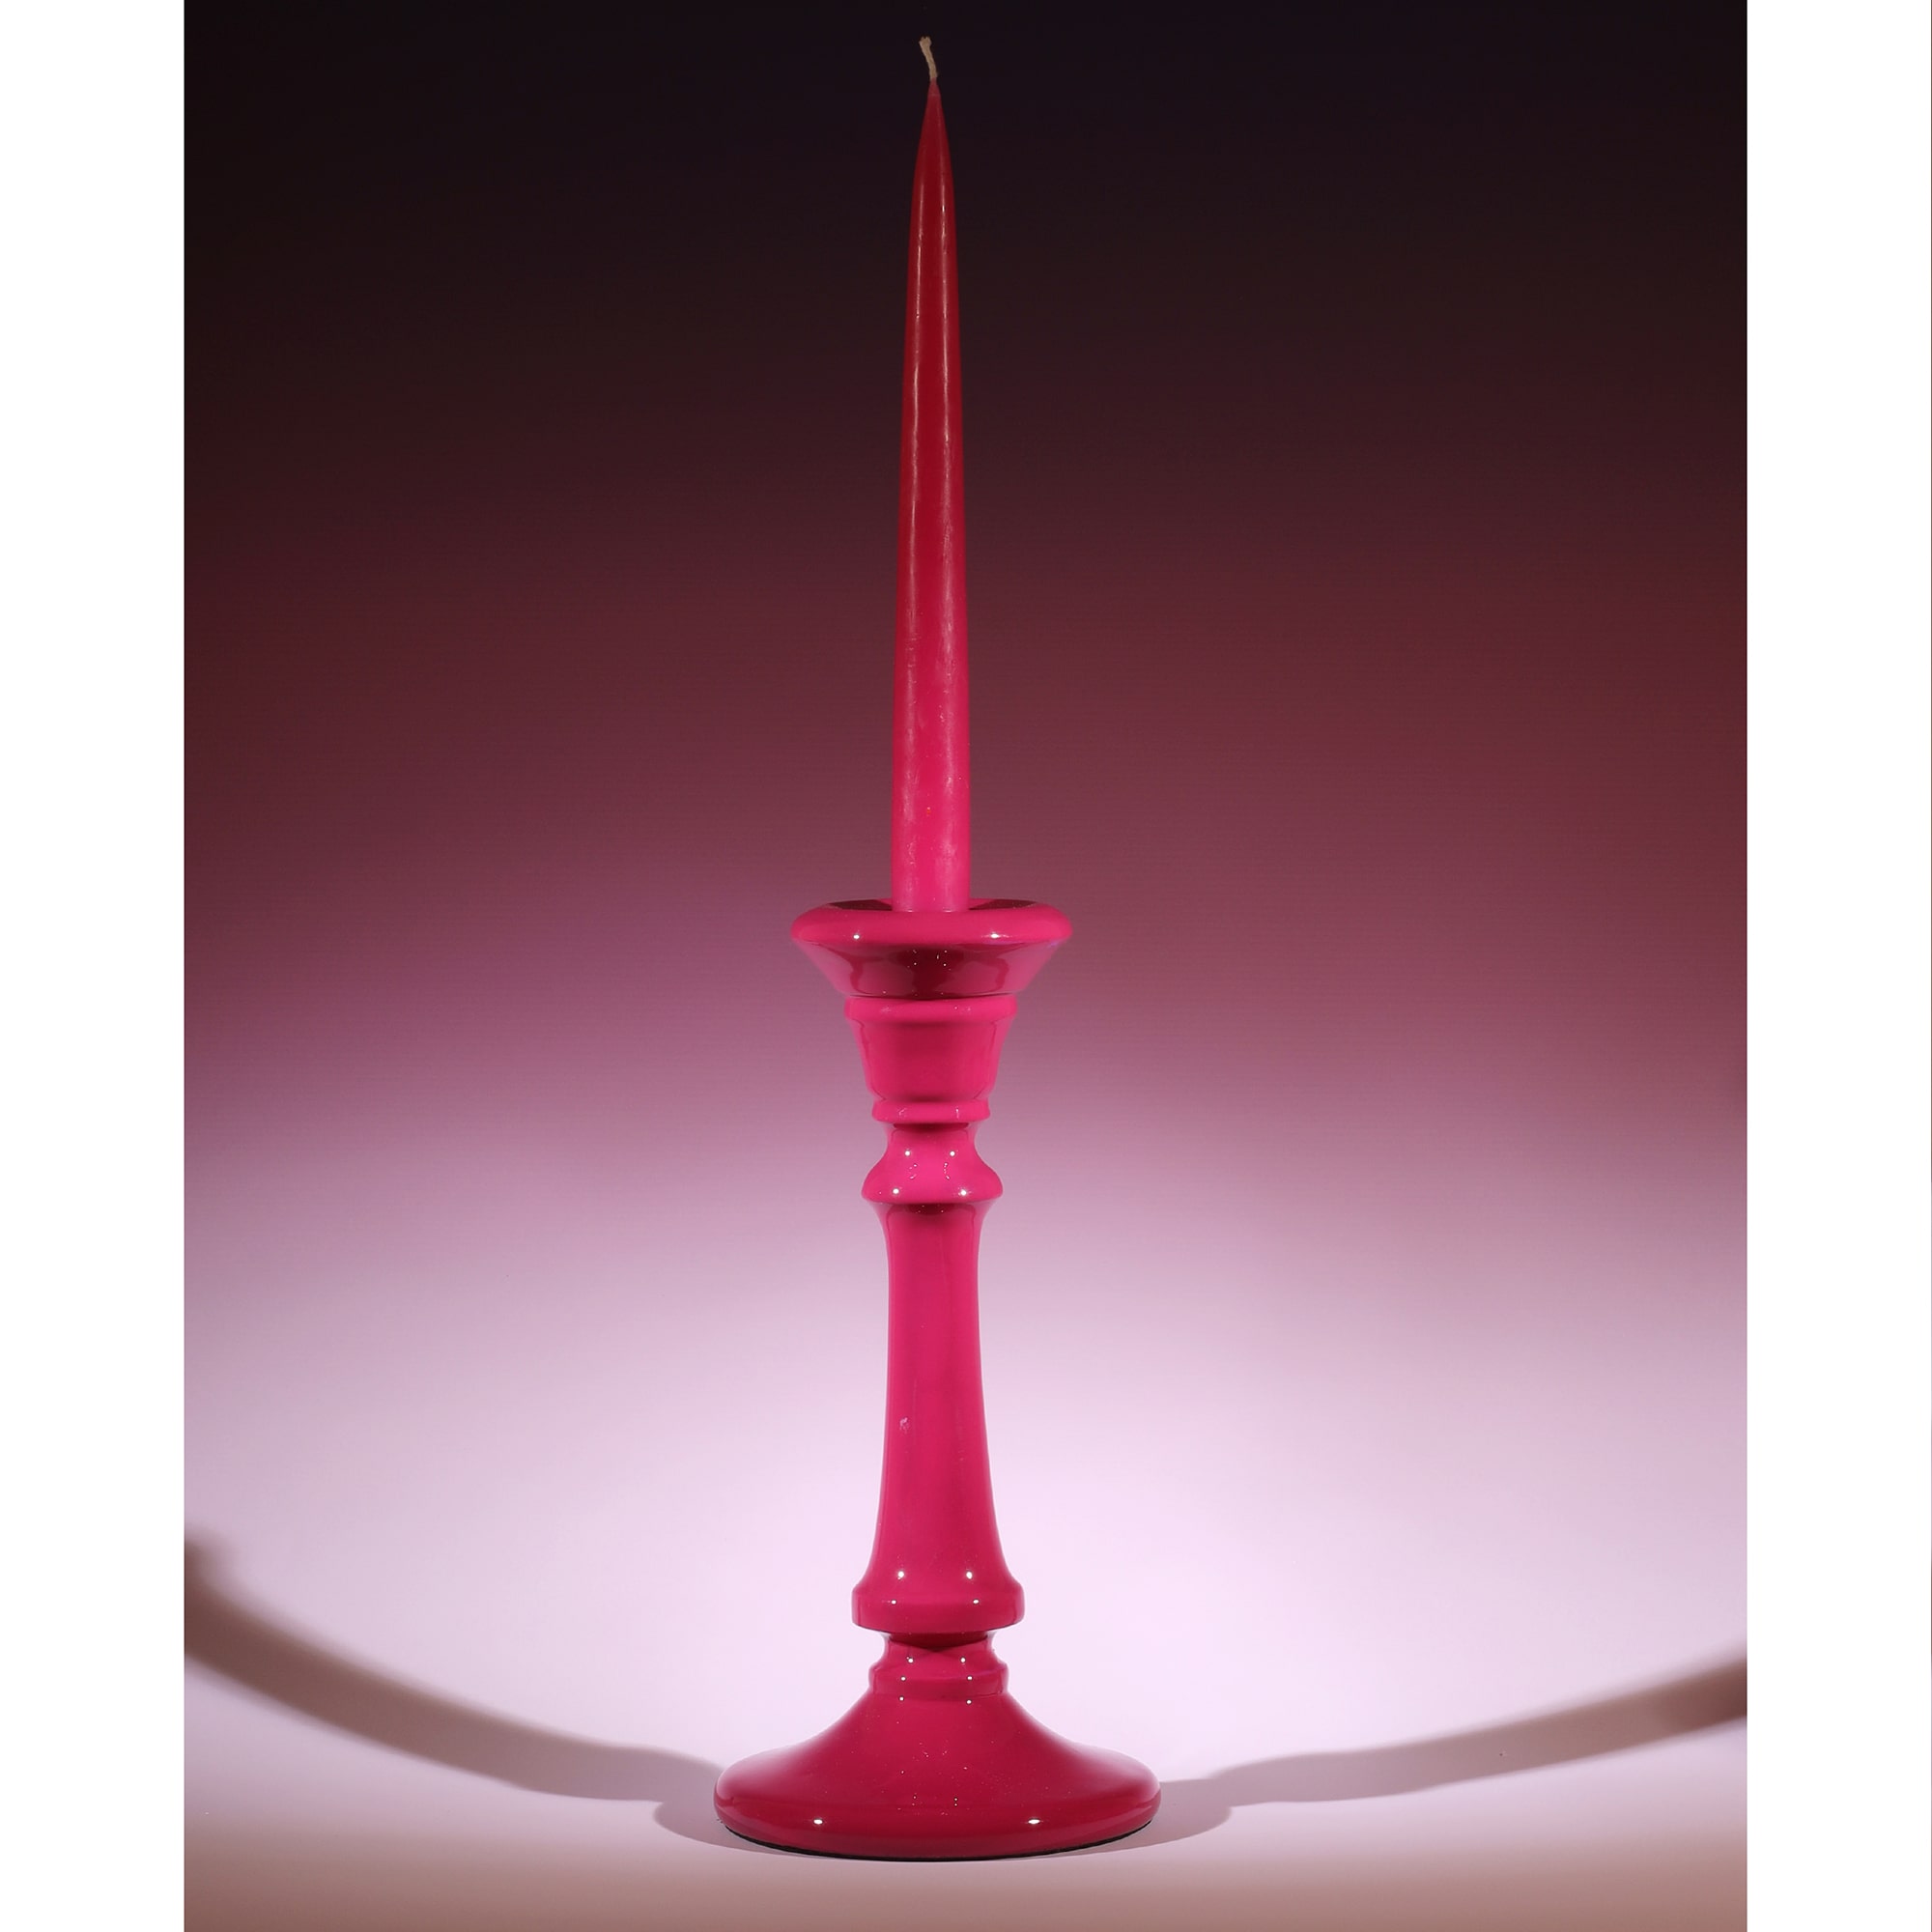 Fuschia Polished Lacquer Tidal Candle holder with a matching candle